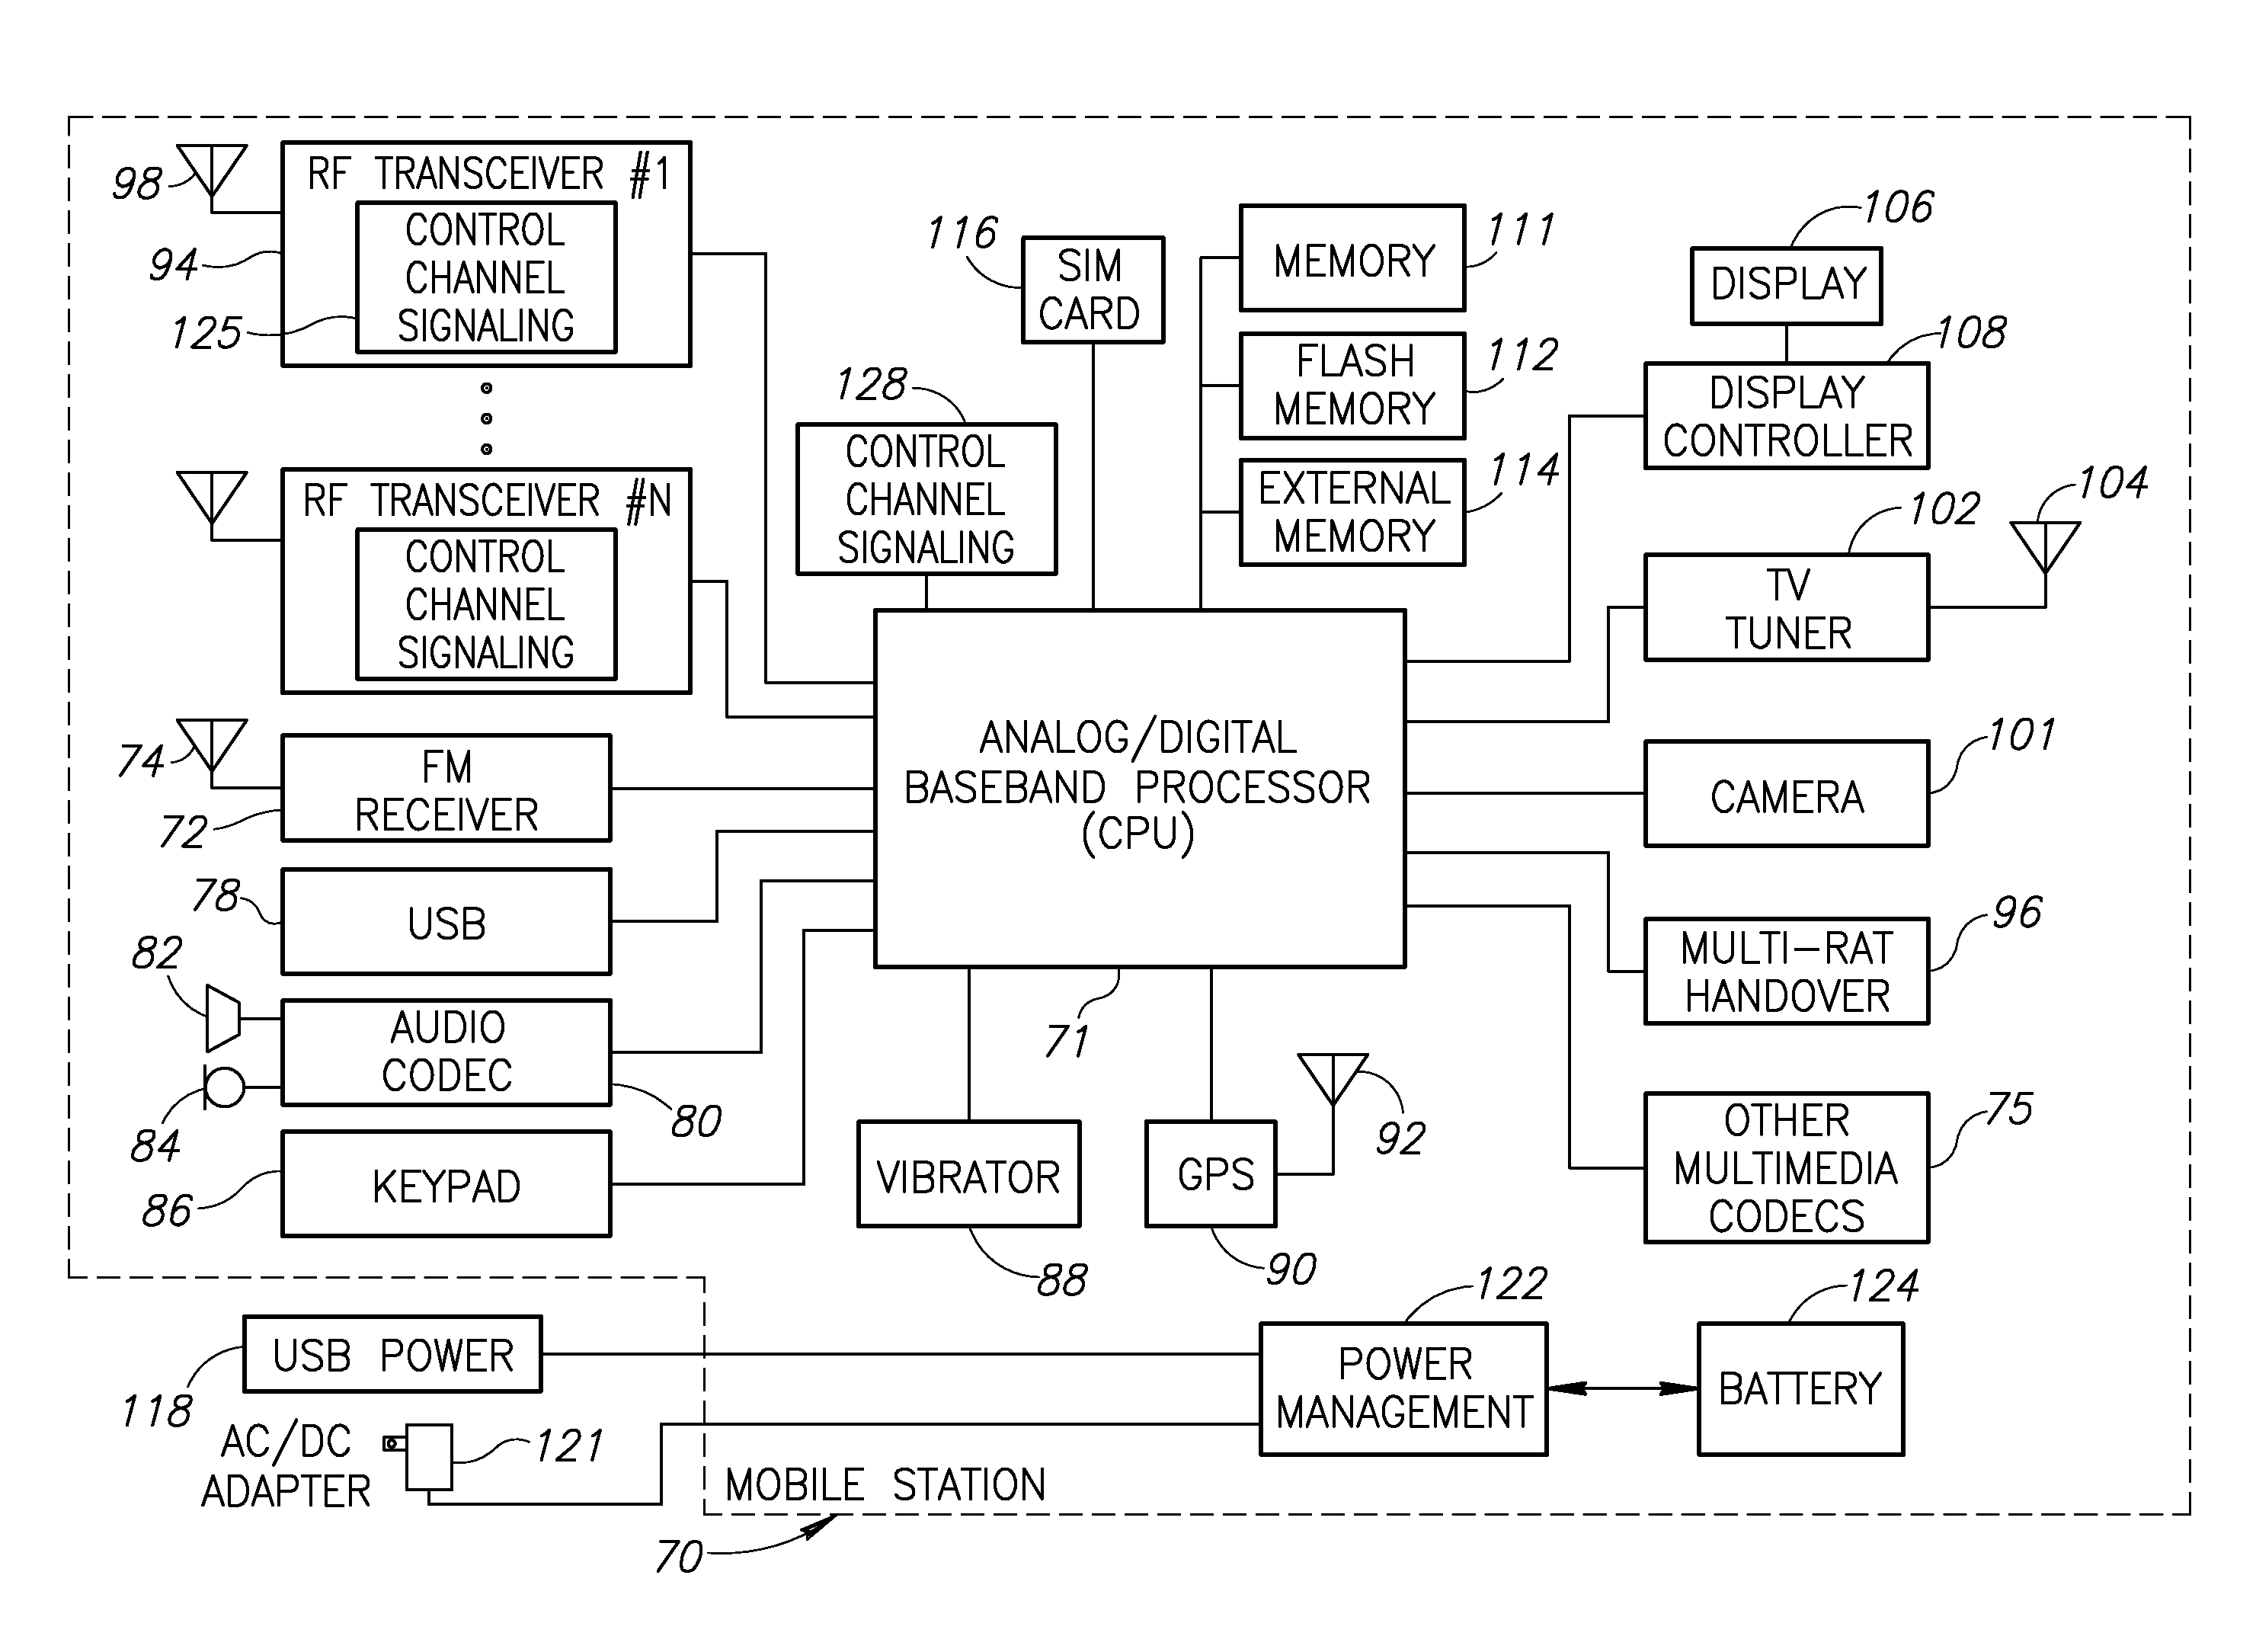 Control channel signaling in a multiple access wireless communication system